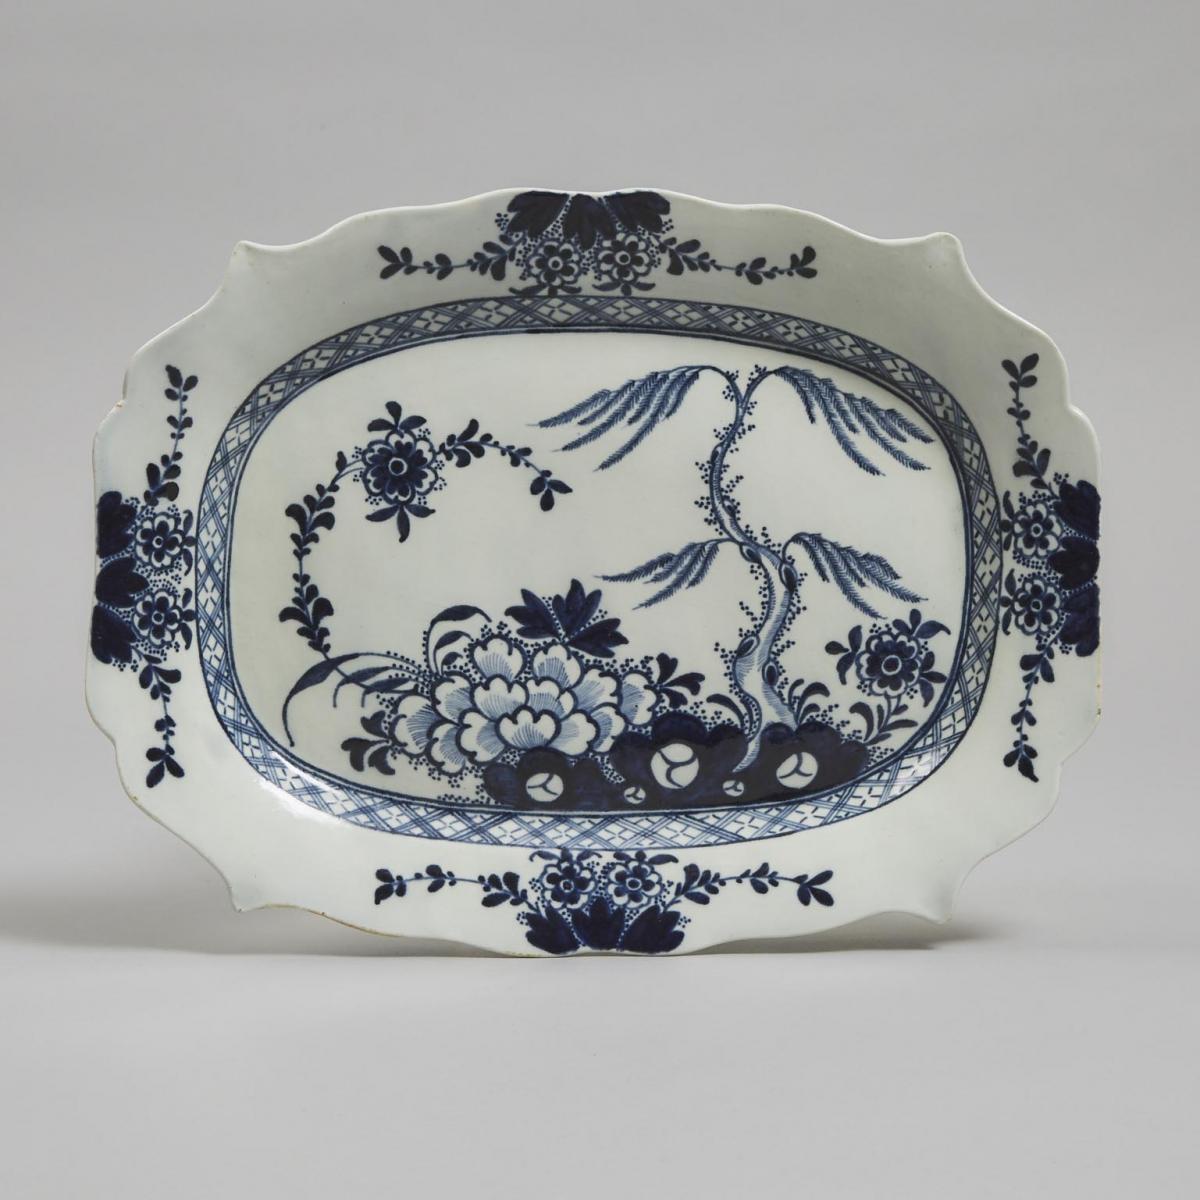 Liverpool Blue and White Shaped Oval Platter, c.1765, length 13.4 in — 34 cm